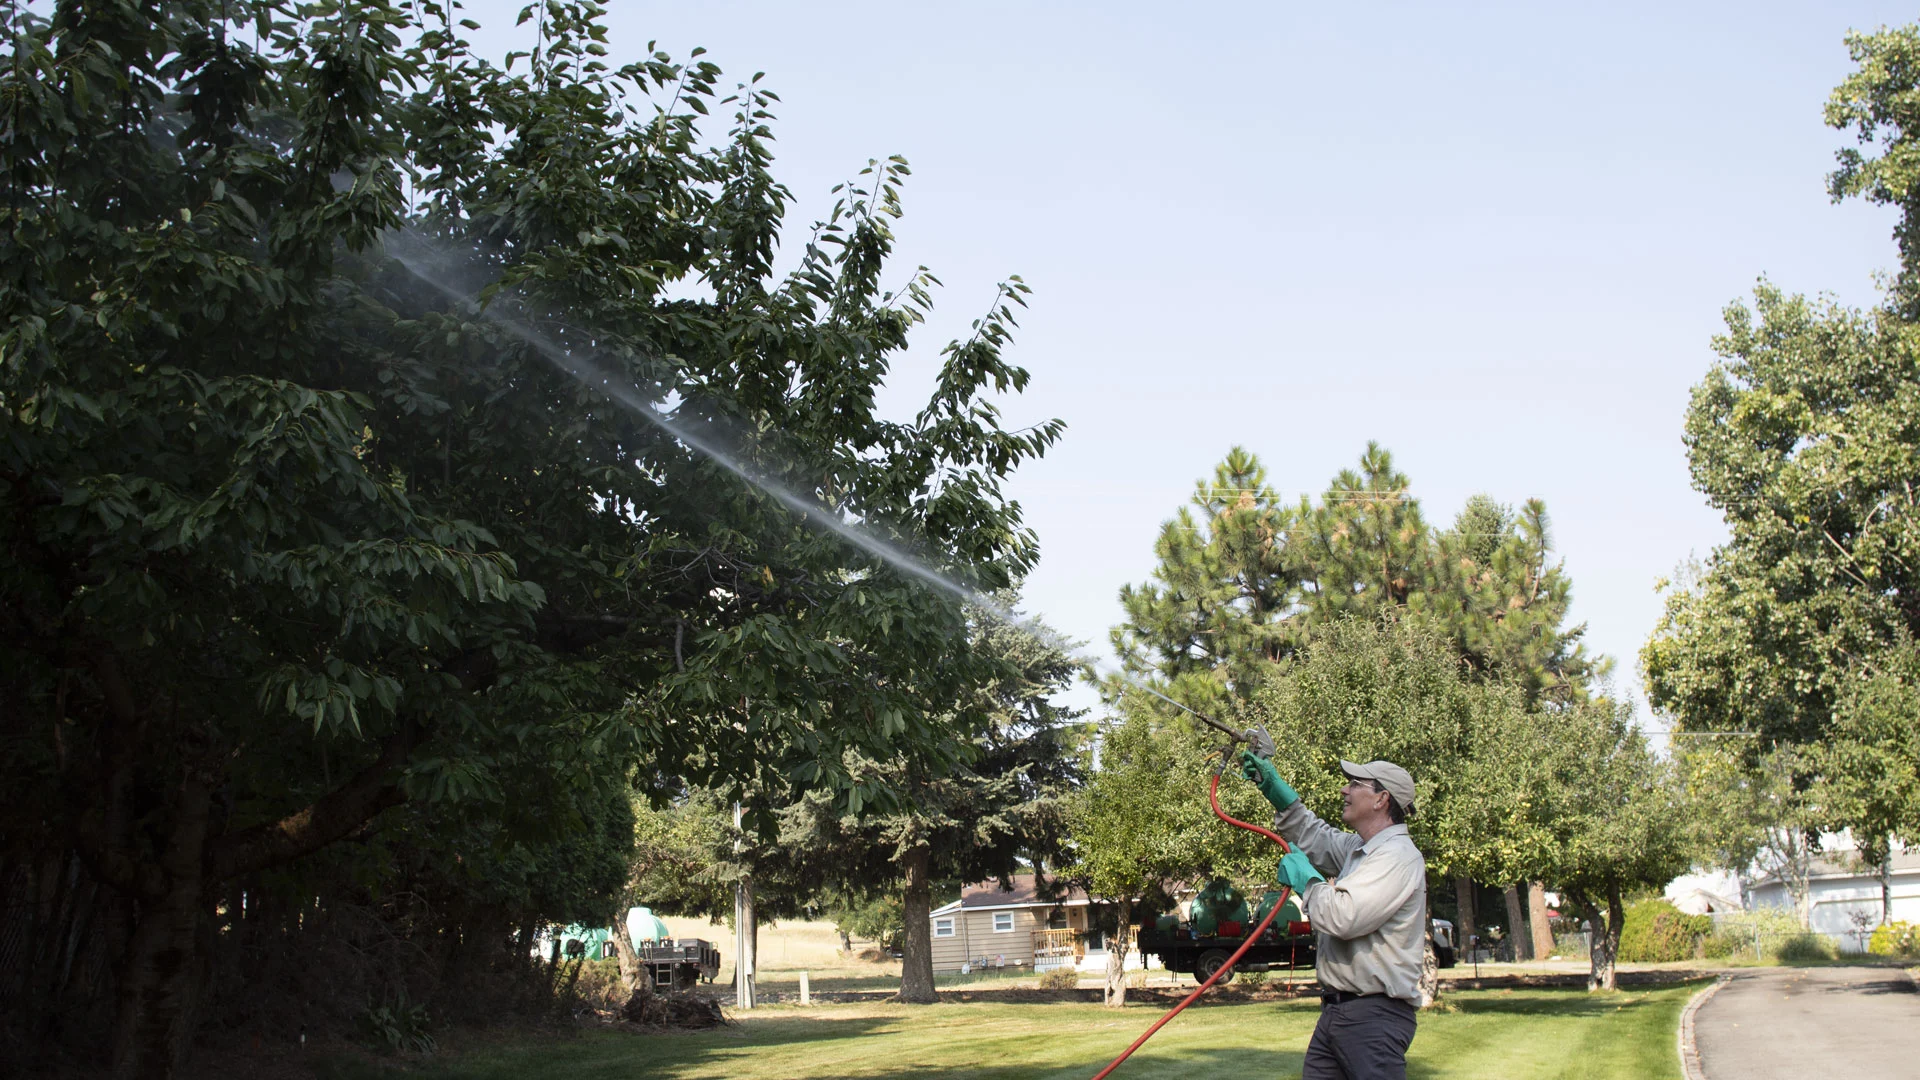 Spraying a large tree with fertilizer at a home in Spokane, WA.